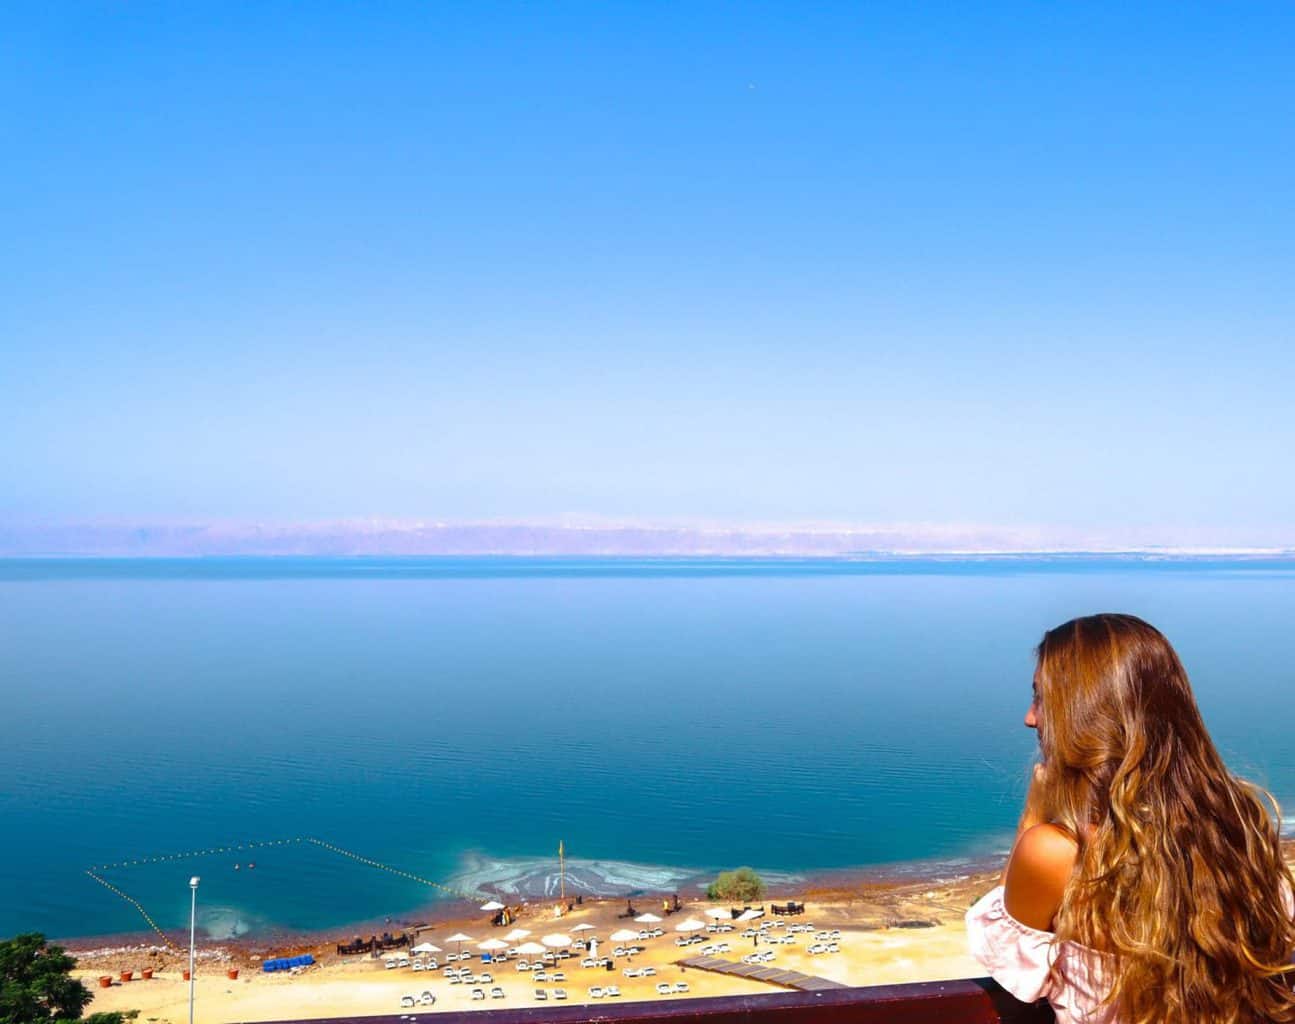 Staying at the Crowne Plaza Dead Sea Resort